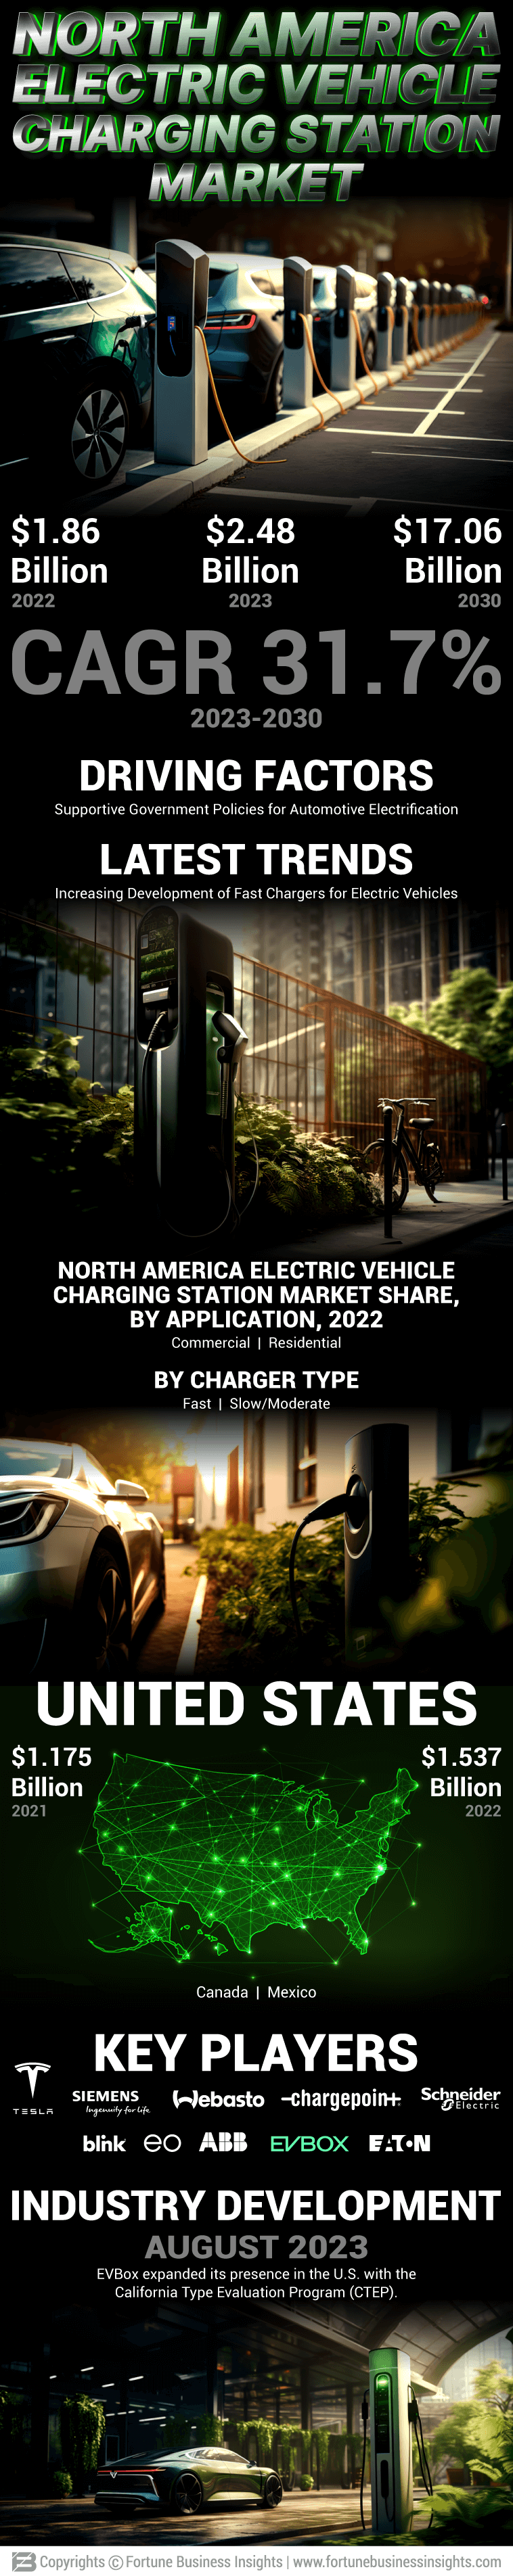 North America Electric Vehicle Charging Station Market